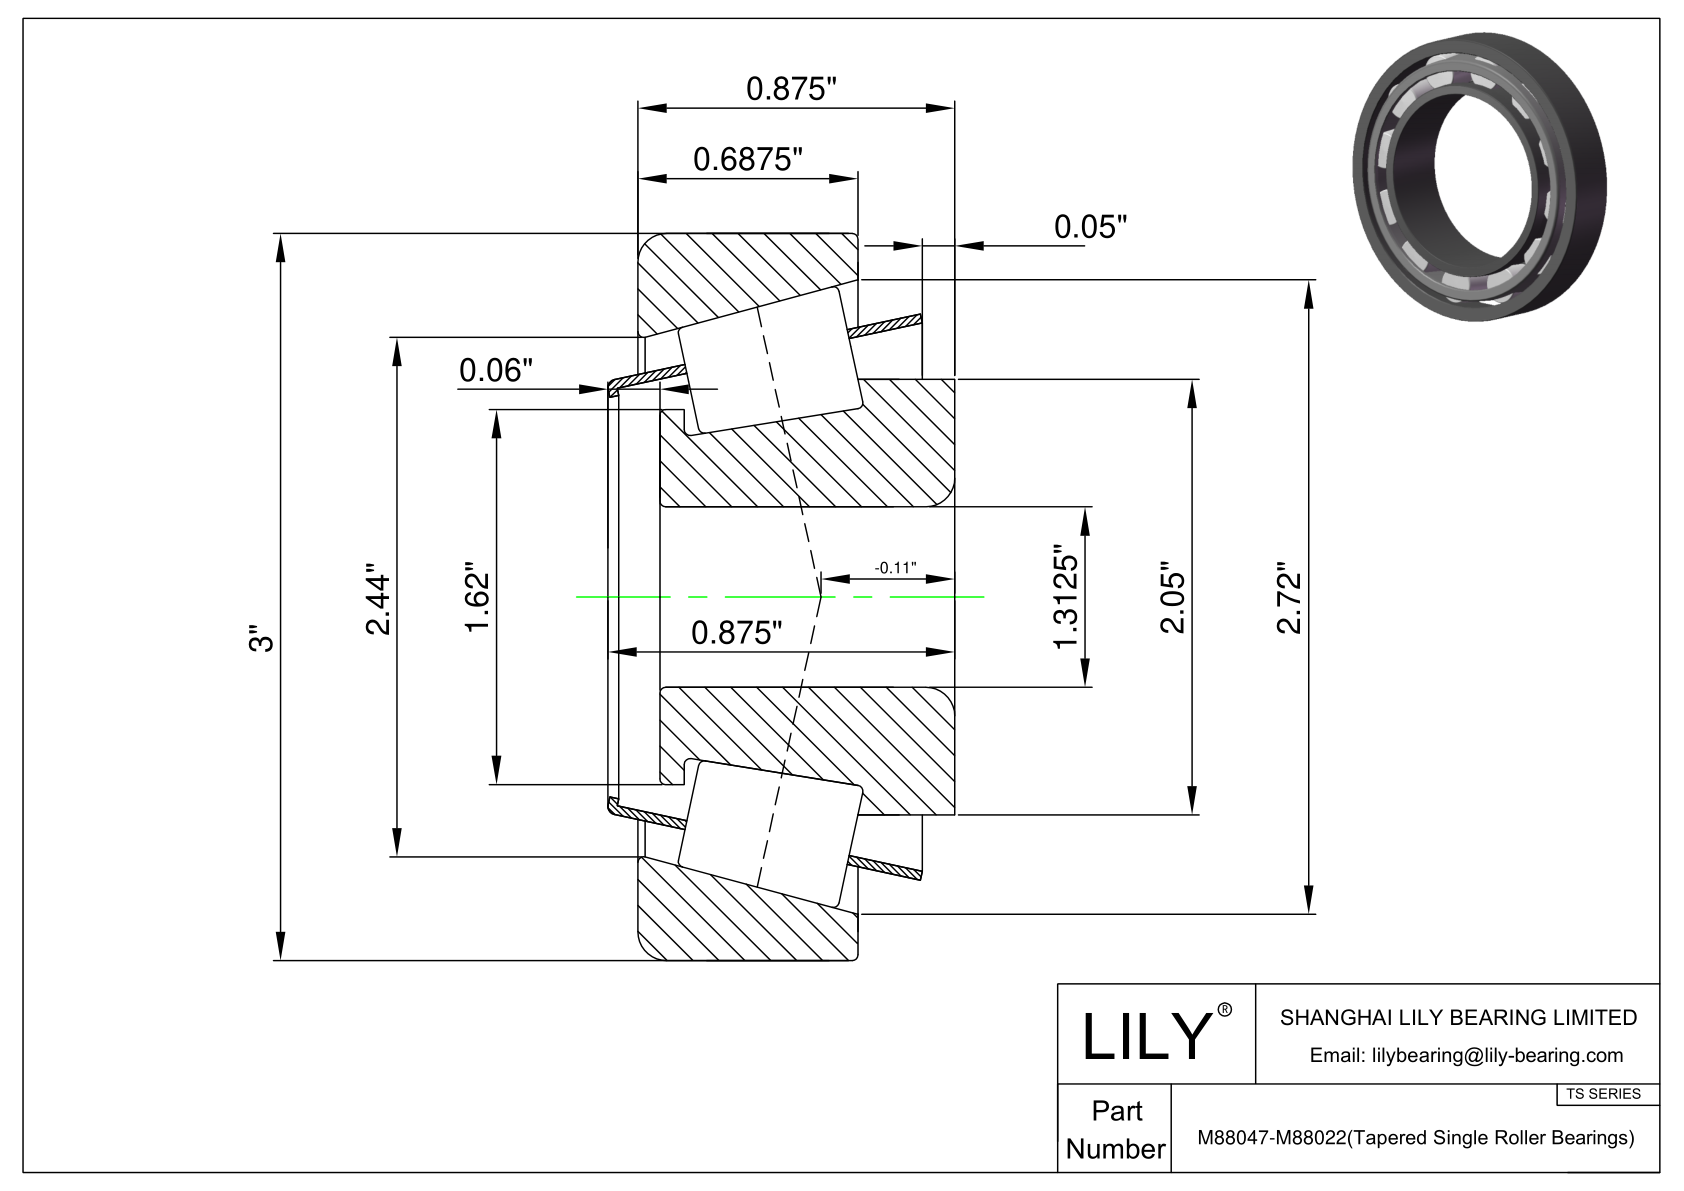 M88047-M88022 TS (Tapered Single Roller Bearings) (Imperial) cad drawing